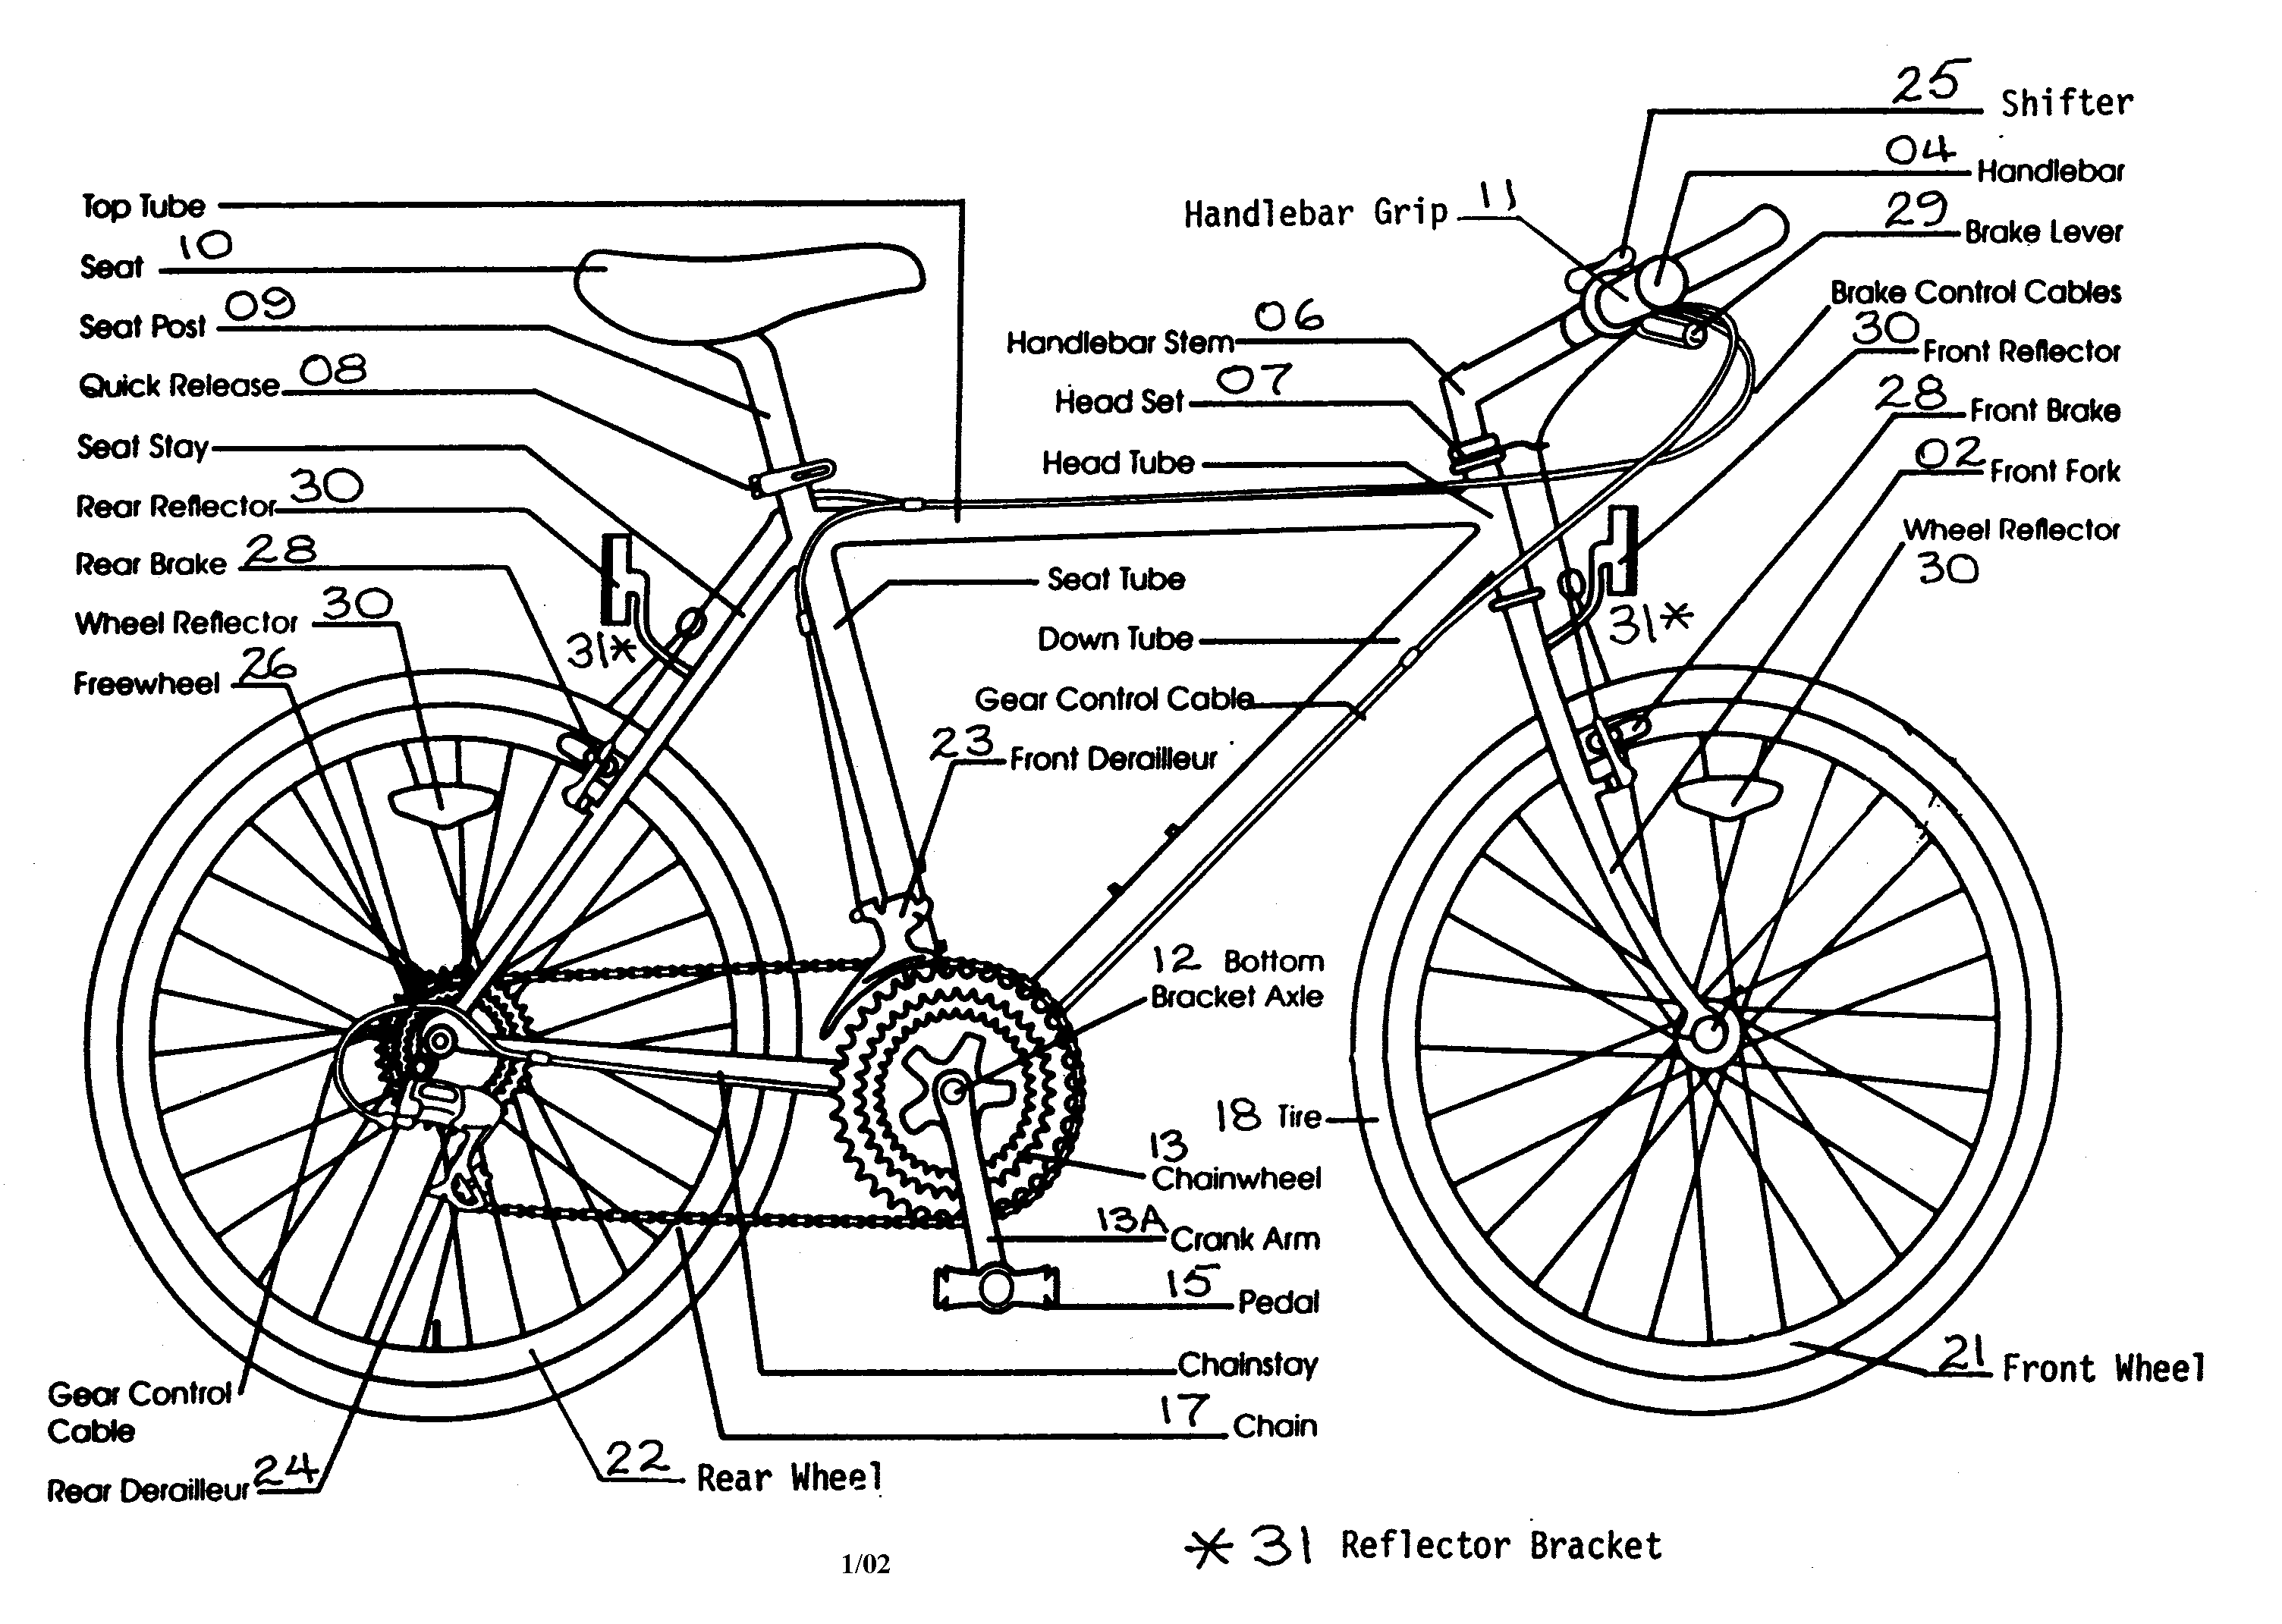 Download this Sears Bike Model picture